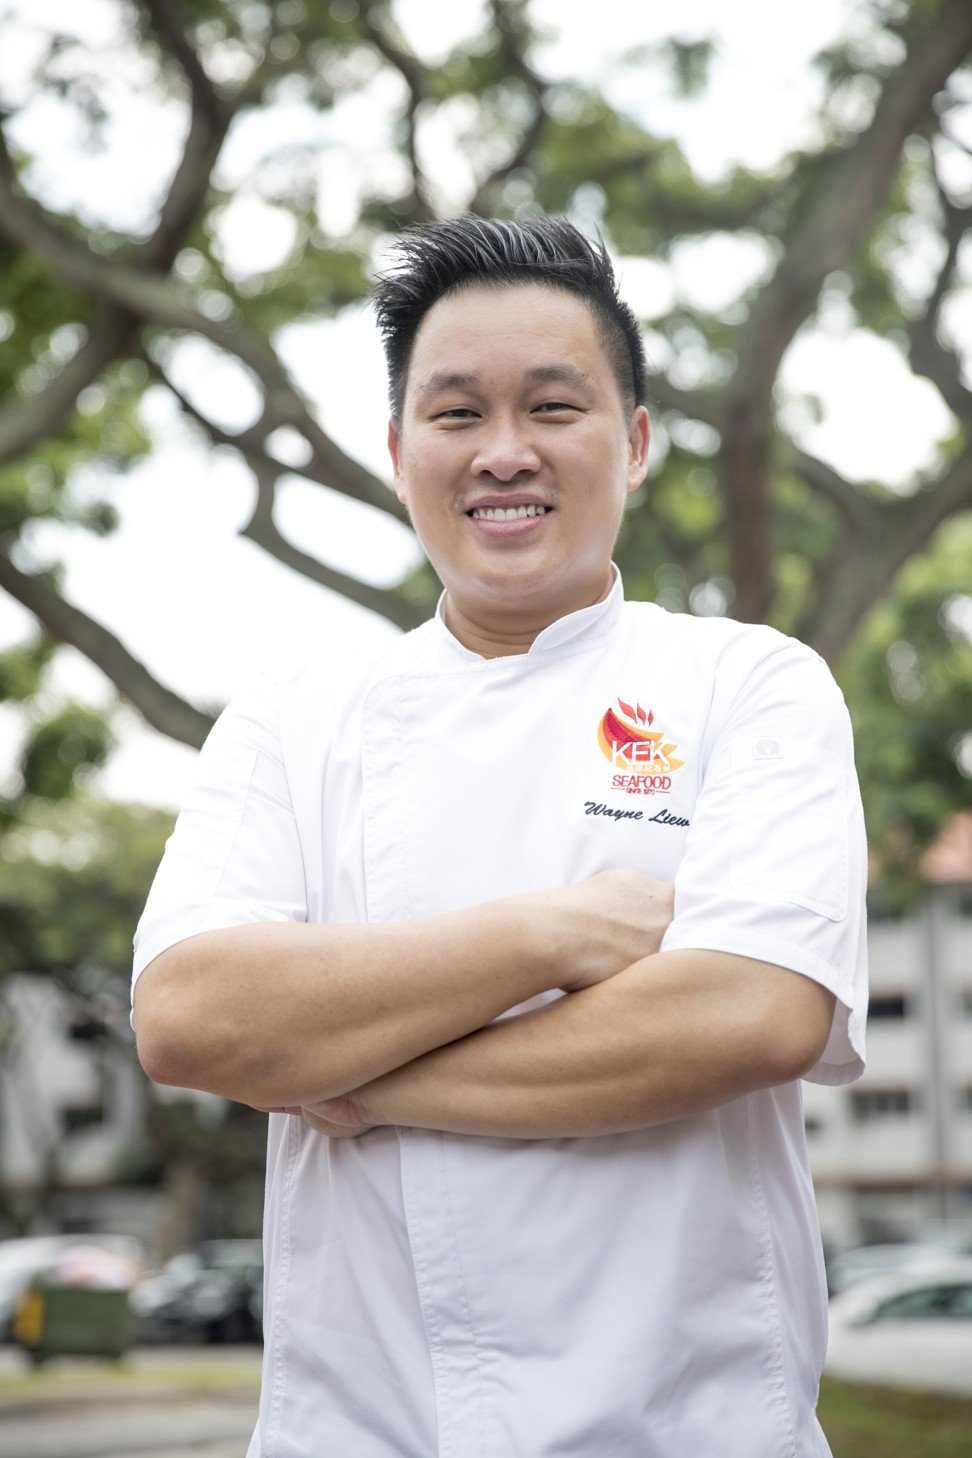 Chef Wayne Liew, who now runs the Ken Eng Kee Seafood restaurant